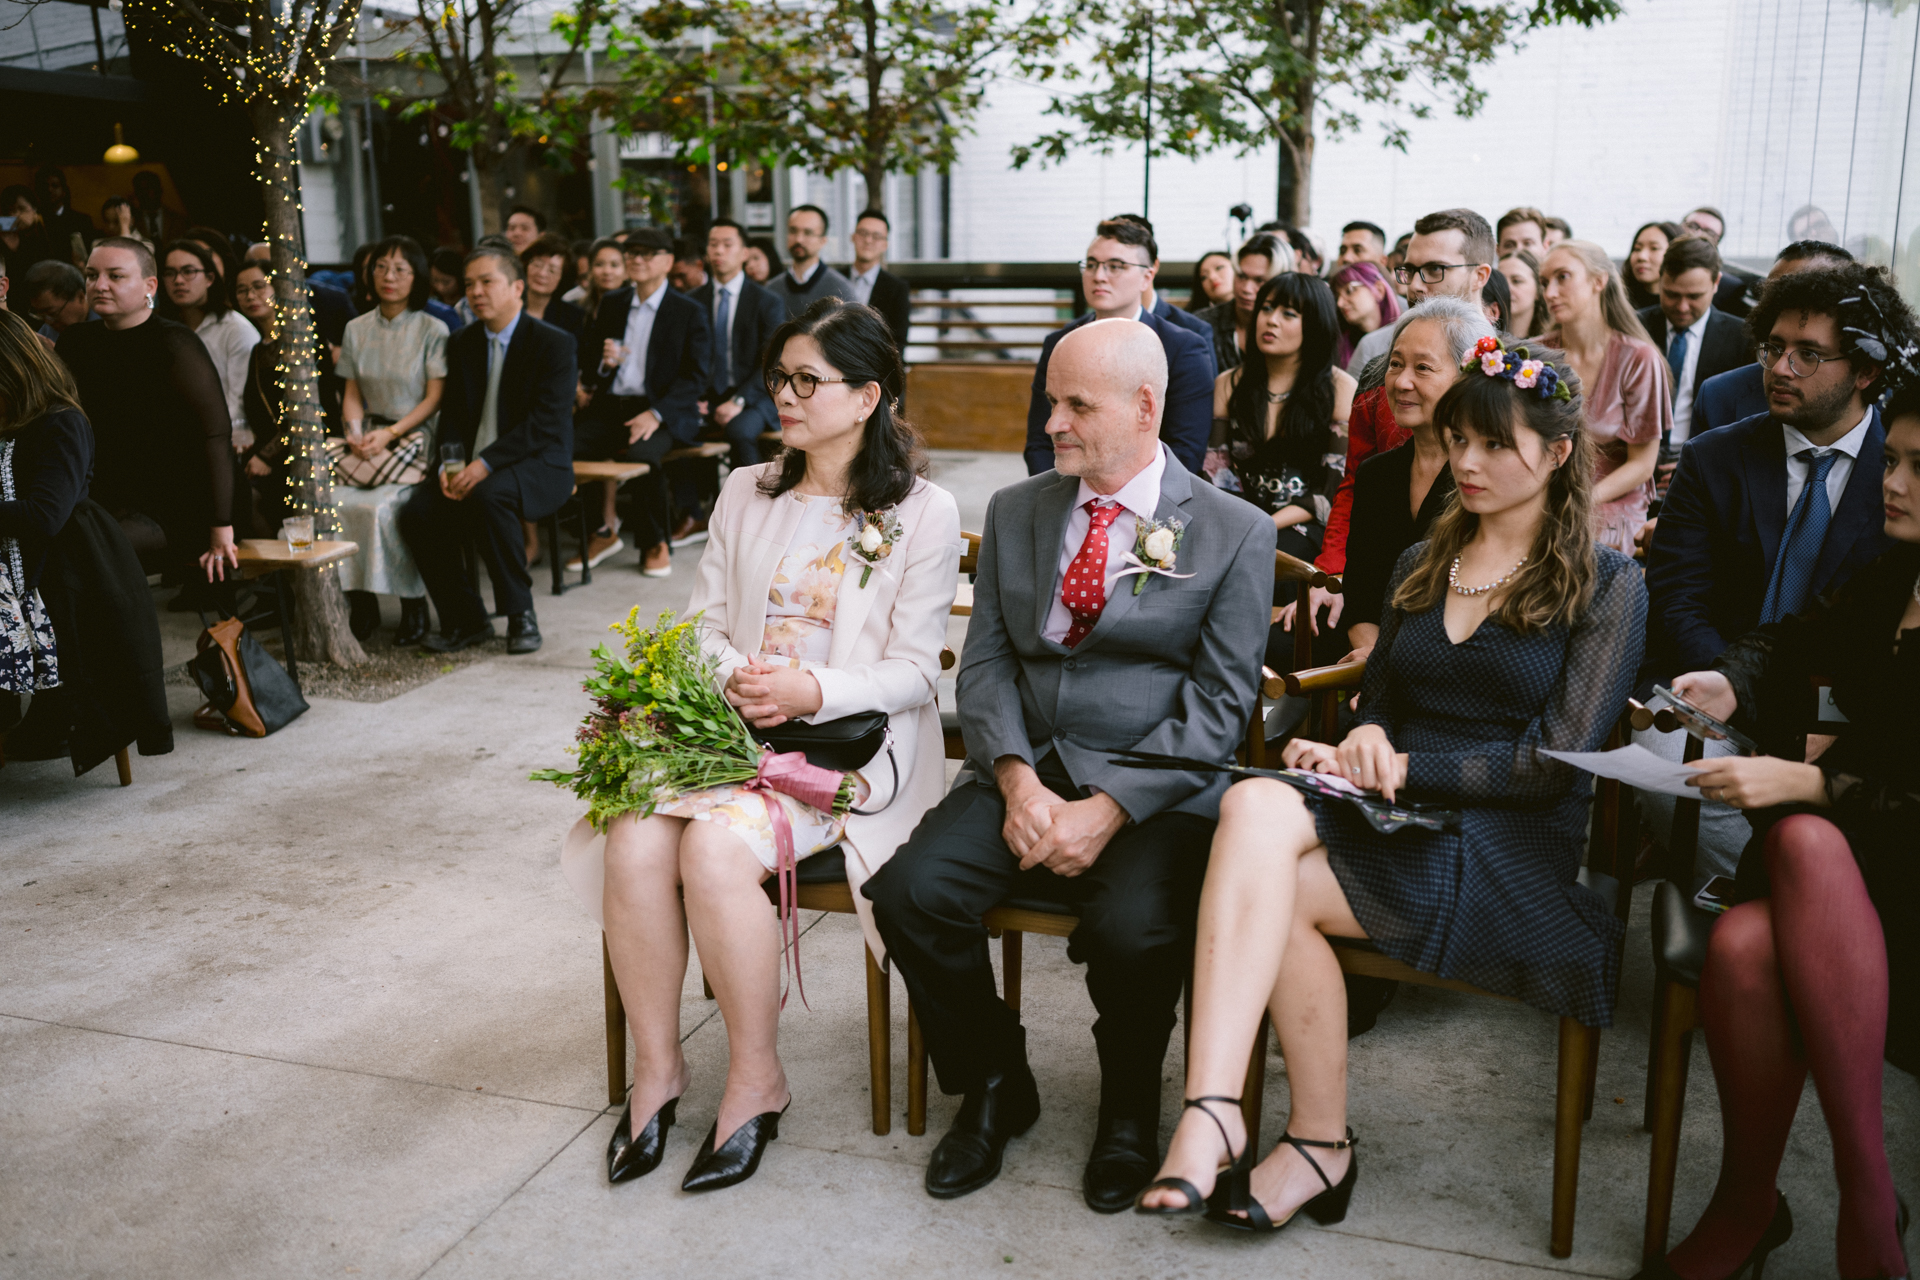 Guests seated at an outdoor micro-wedding ceremony